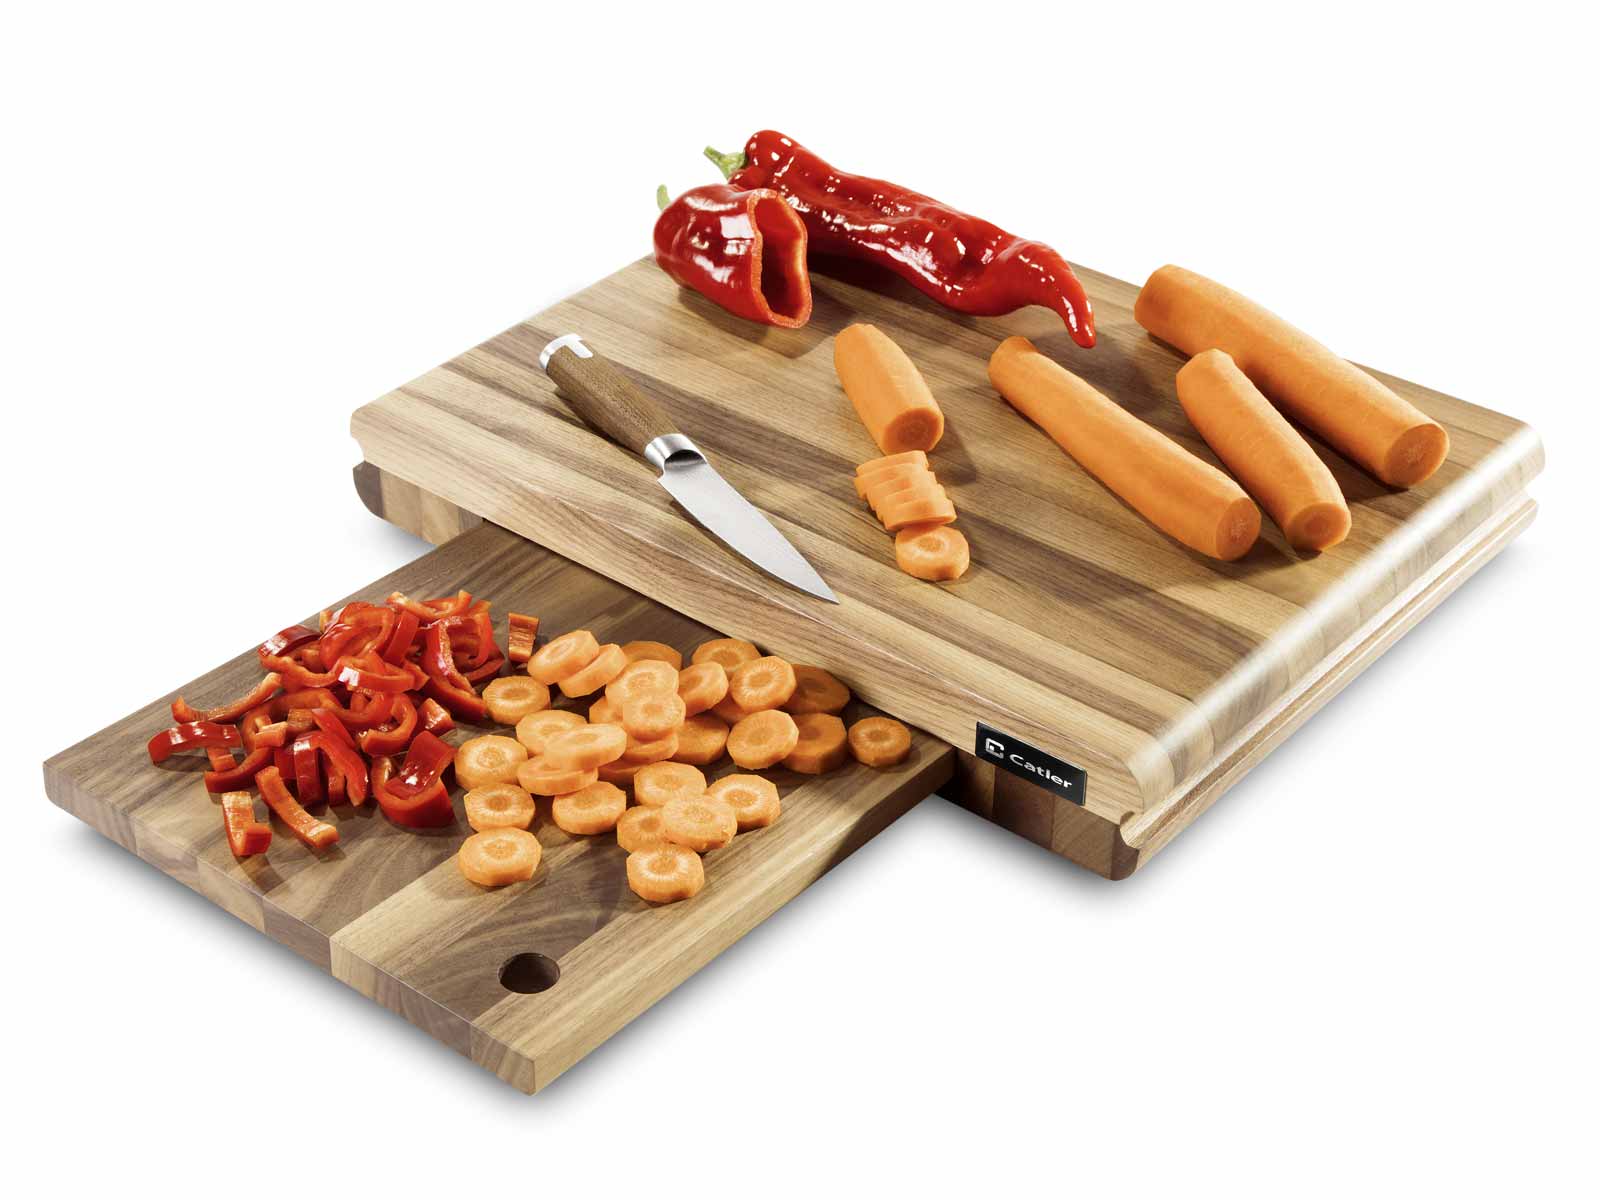 WITH A SLIDE-OUT CUTTING BOARD